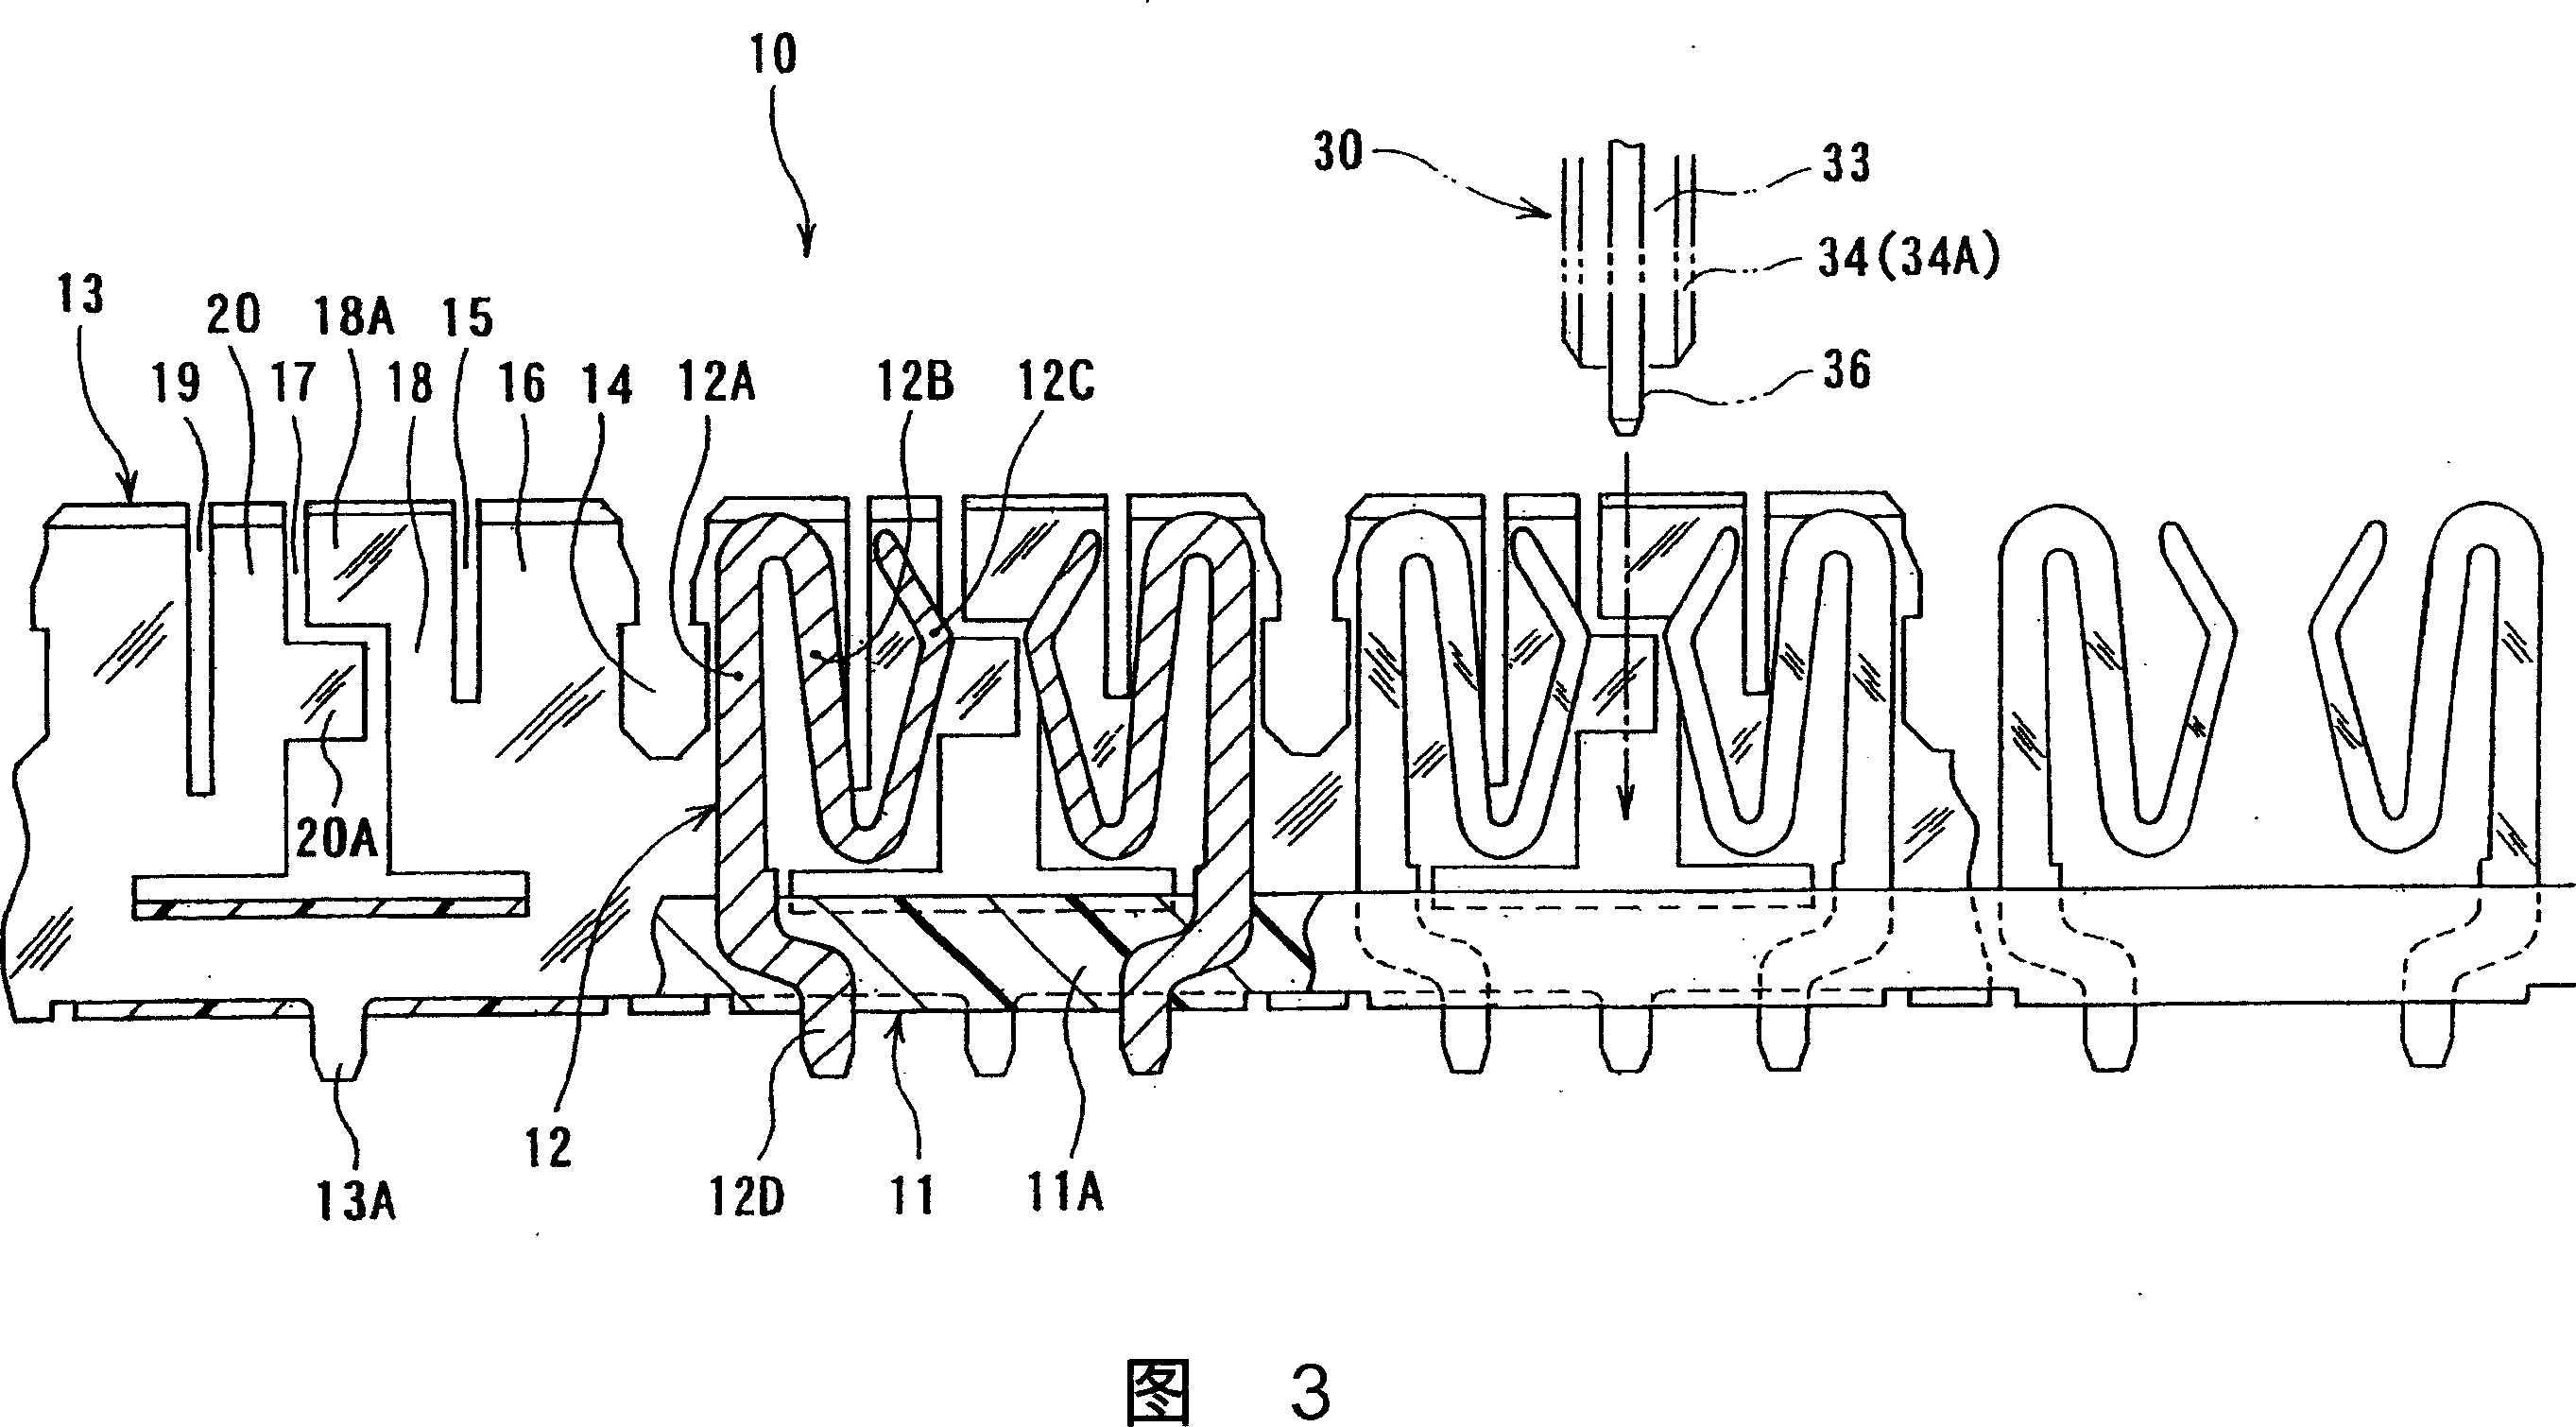 Electrical connector having ground planes